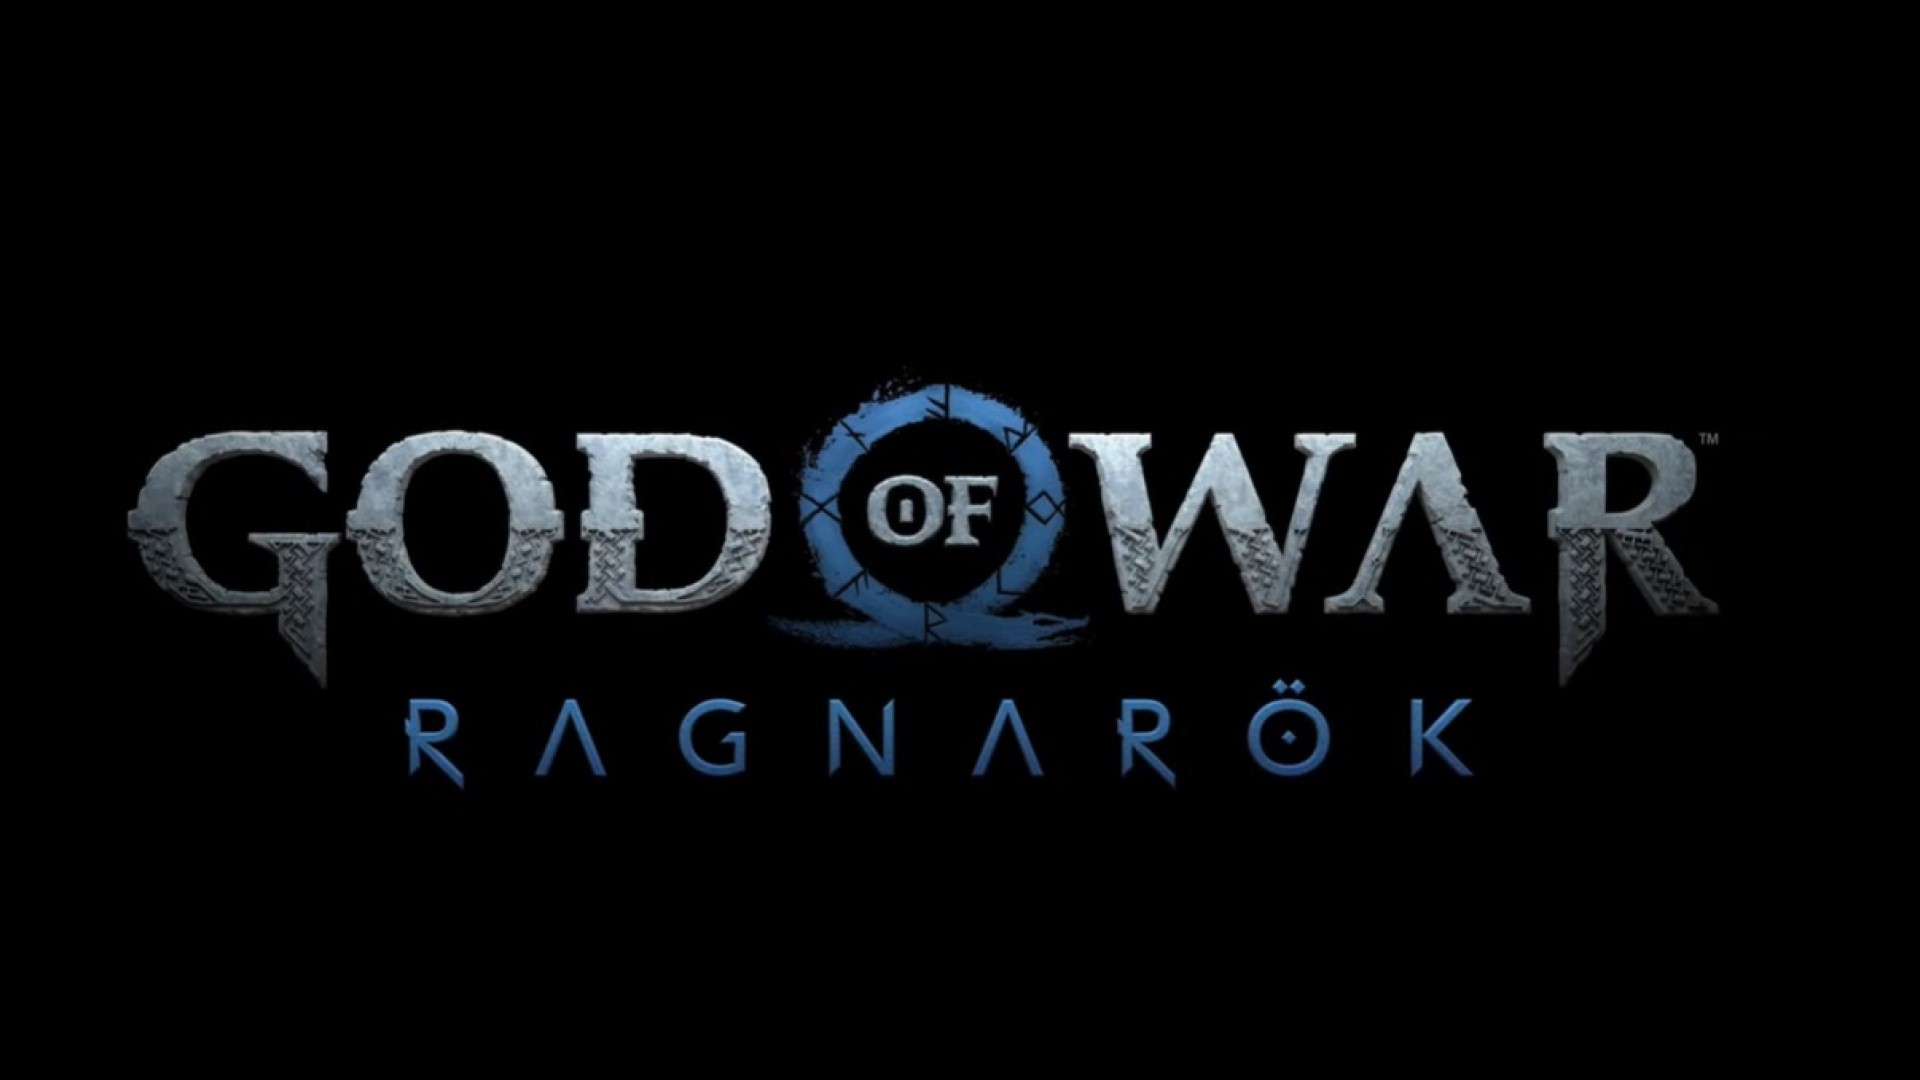 God of War: Ragnarok Officially Named, Receives New Story and Gameplay Trailer